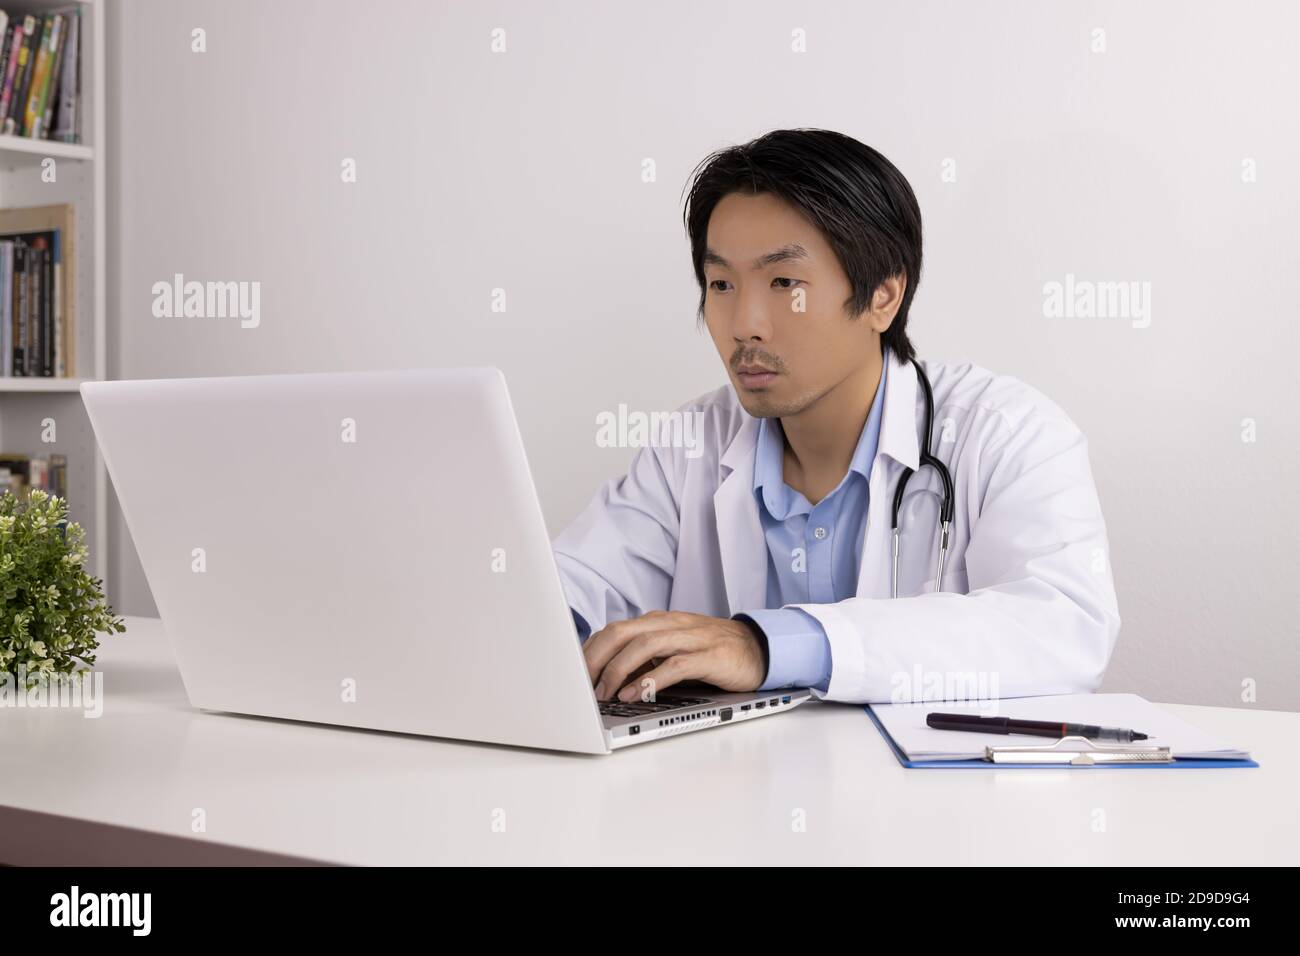 Young Asian Doctor Man in Lab Coat or Gown with Stethoscope Using Laptop Computer on Doctor Table in Office Stock Photo